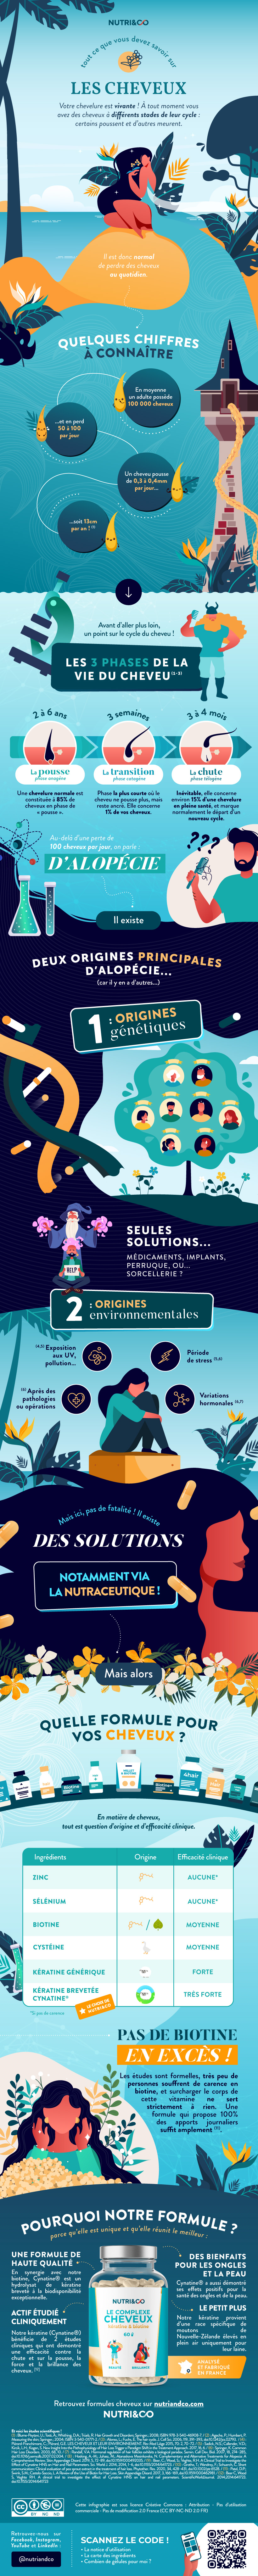 Infographie cheveux